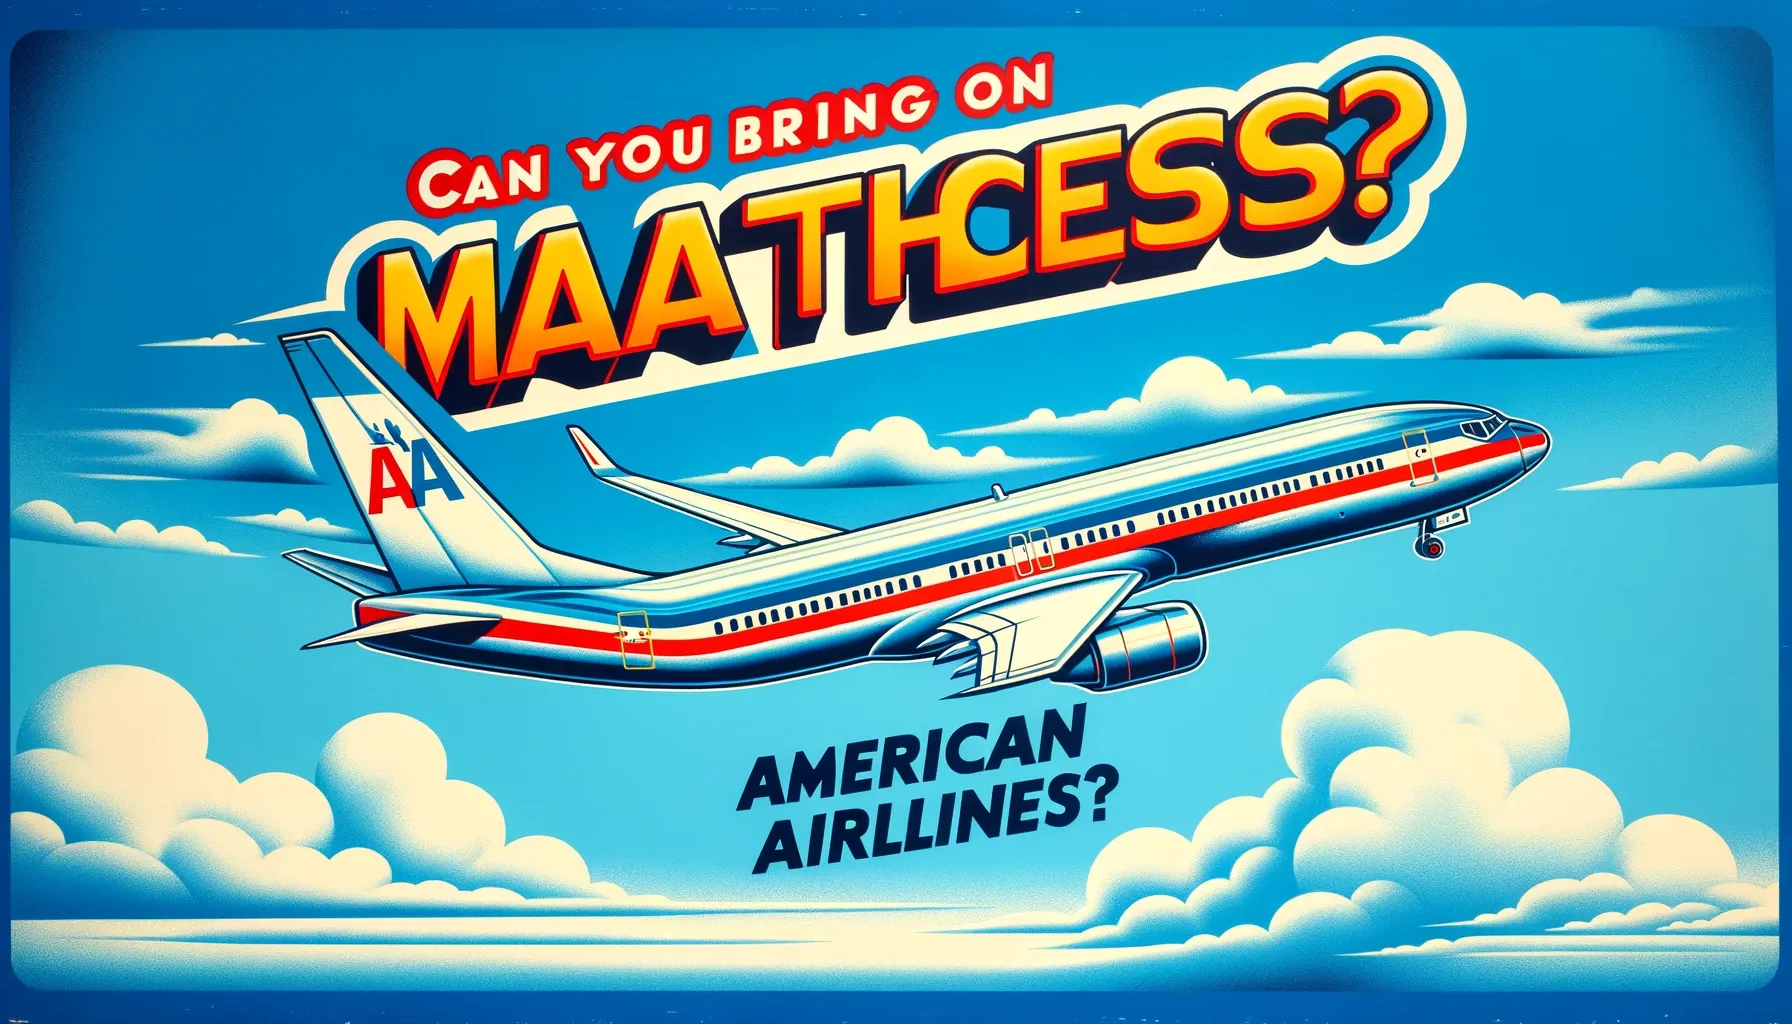 Can You Bring Matches on a Plane with American Airlines